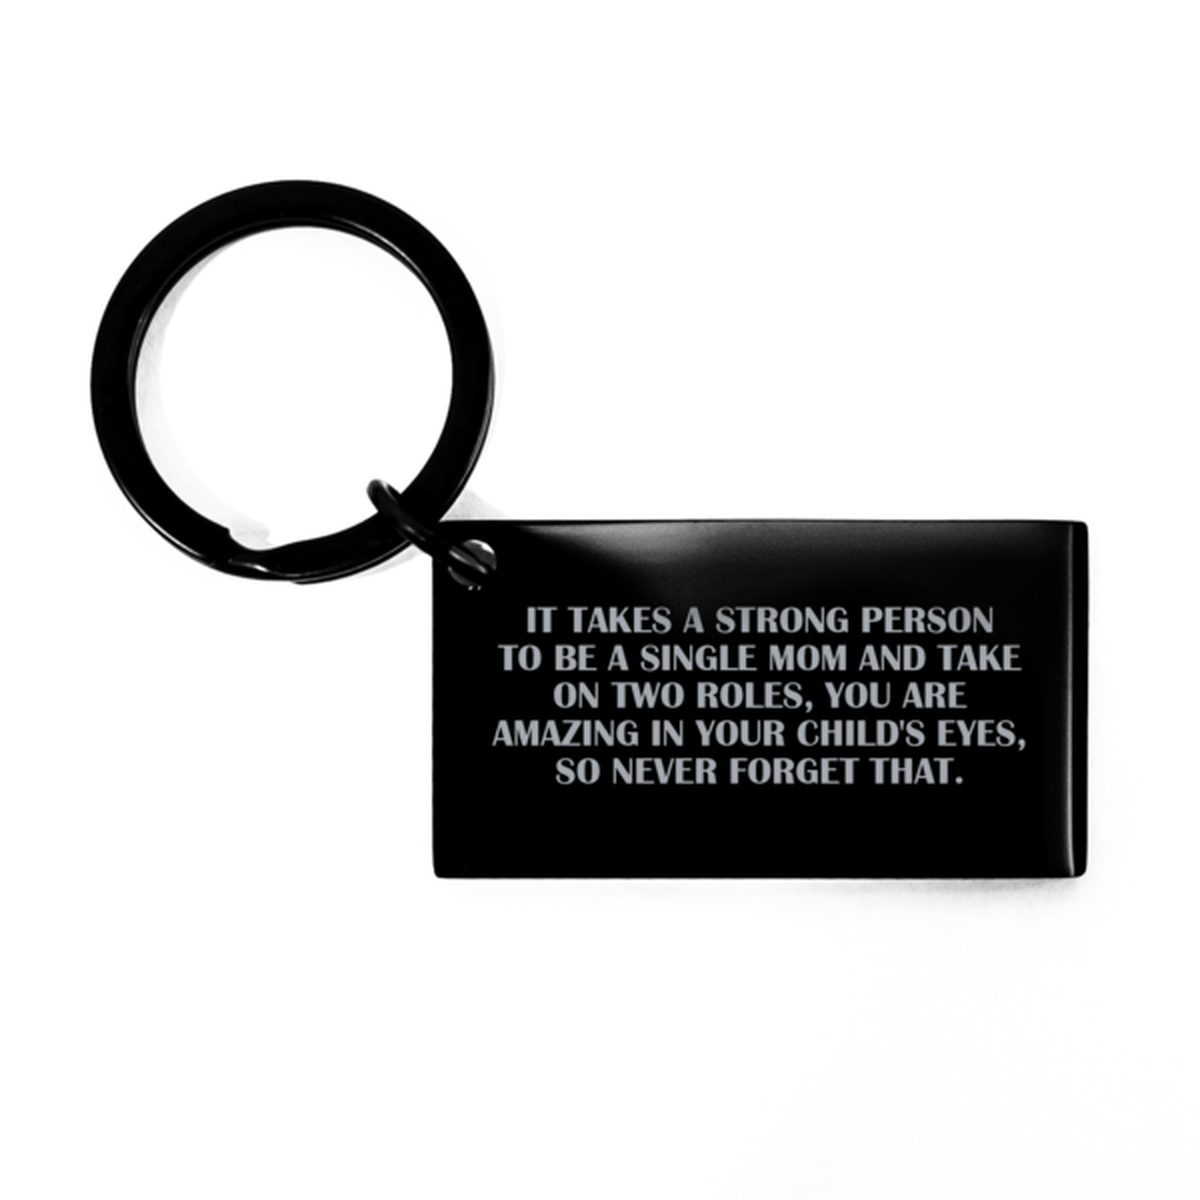 To My Single Mom Black Keychain, A Strong Person, Mothers Day Gifts For Single Mom From Friends, Birthday Gifts For Women